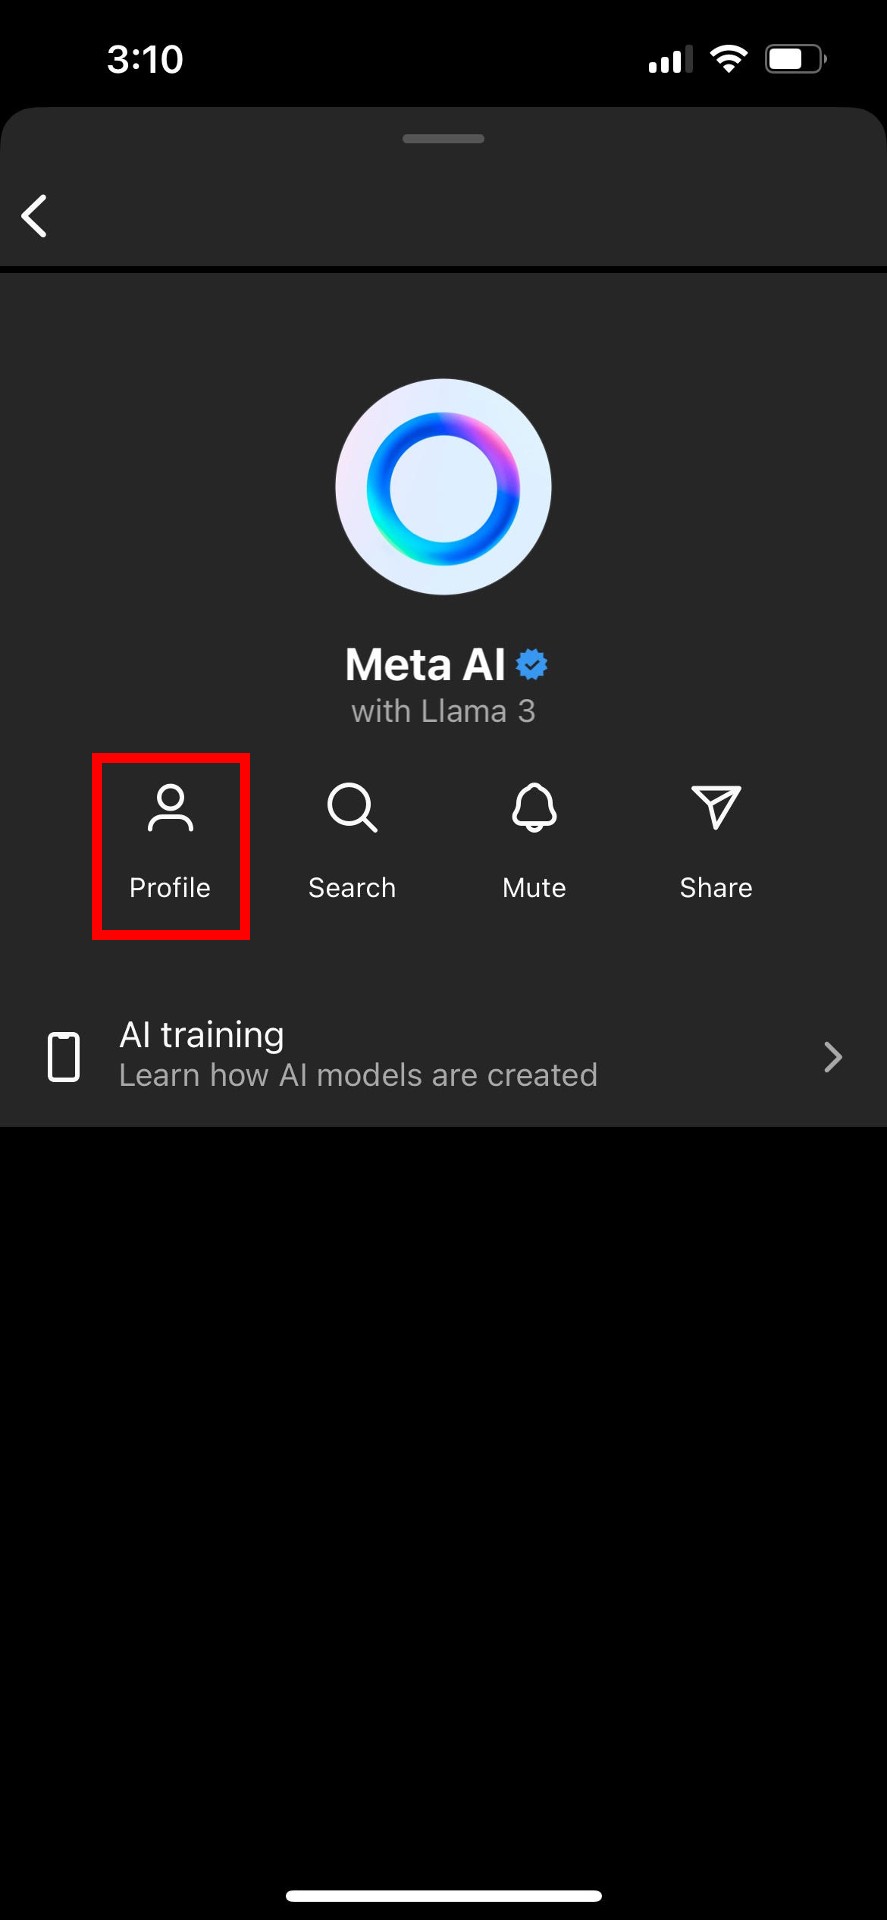 Instagram Meta AI chat options page